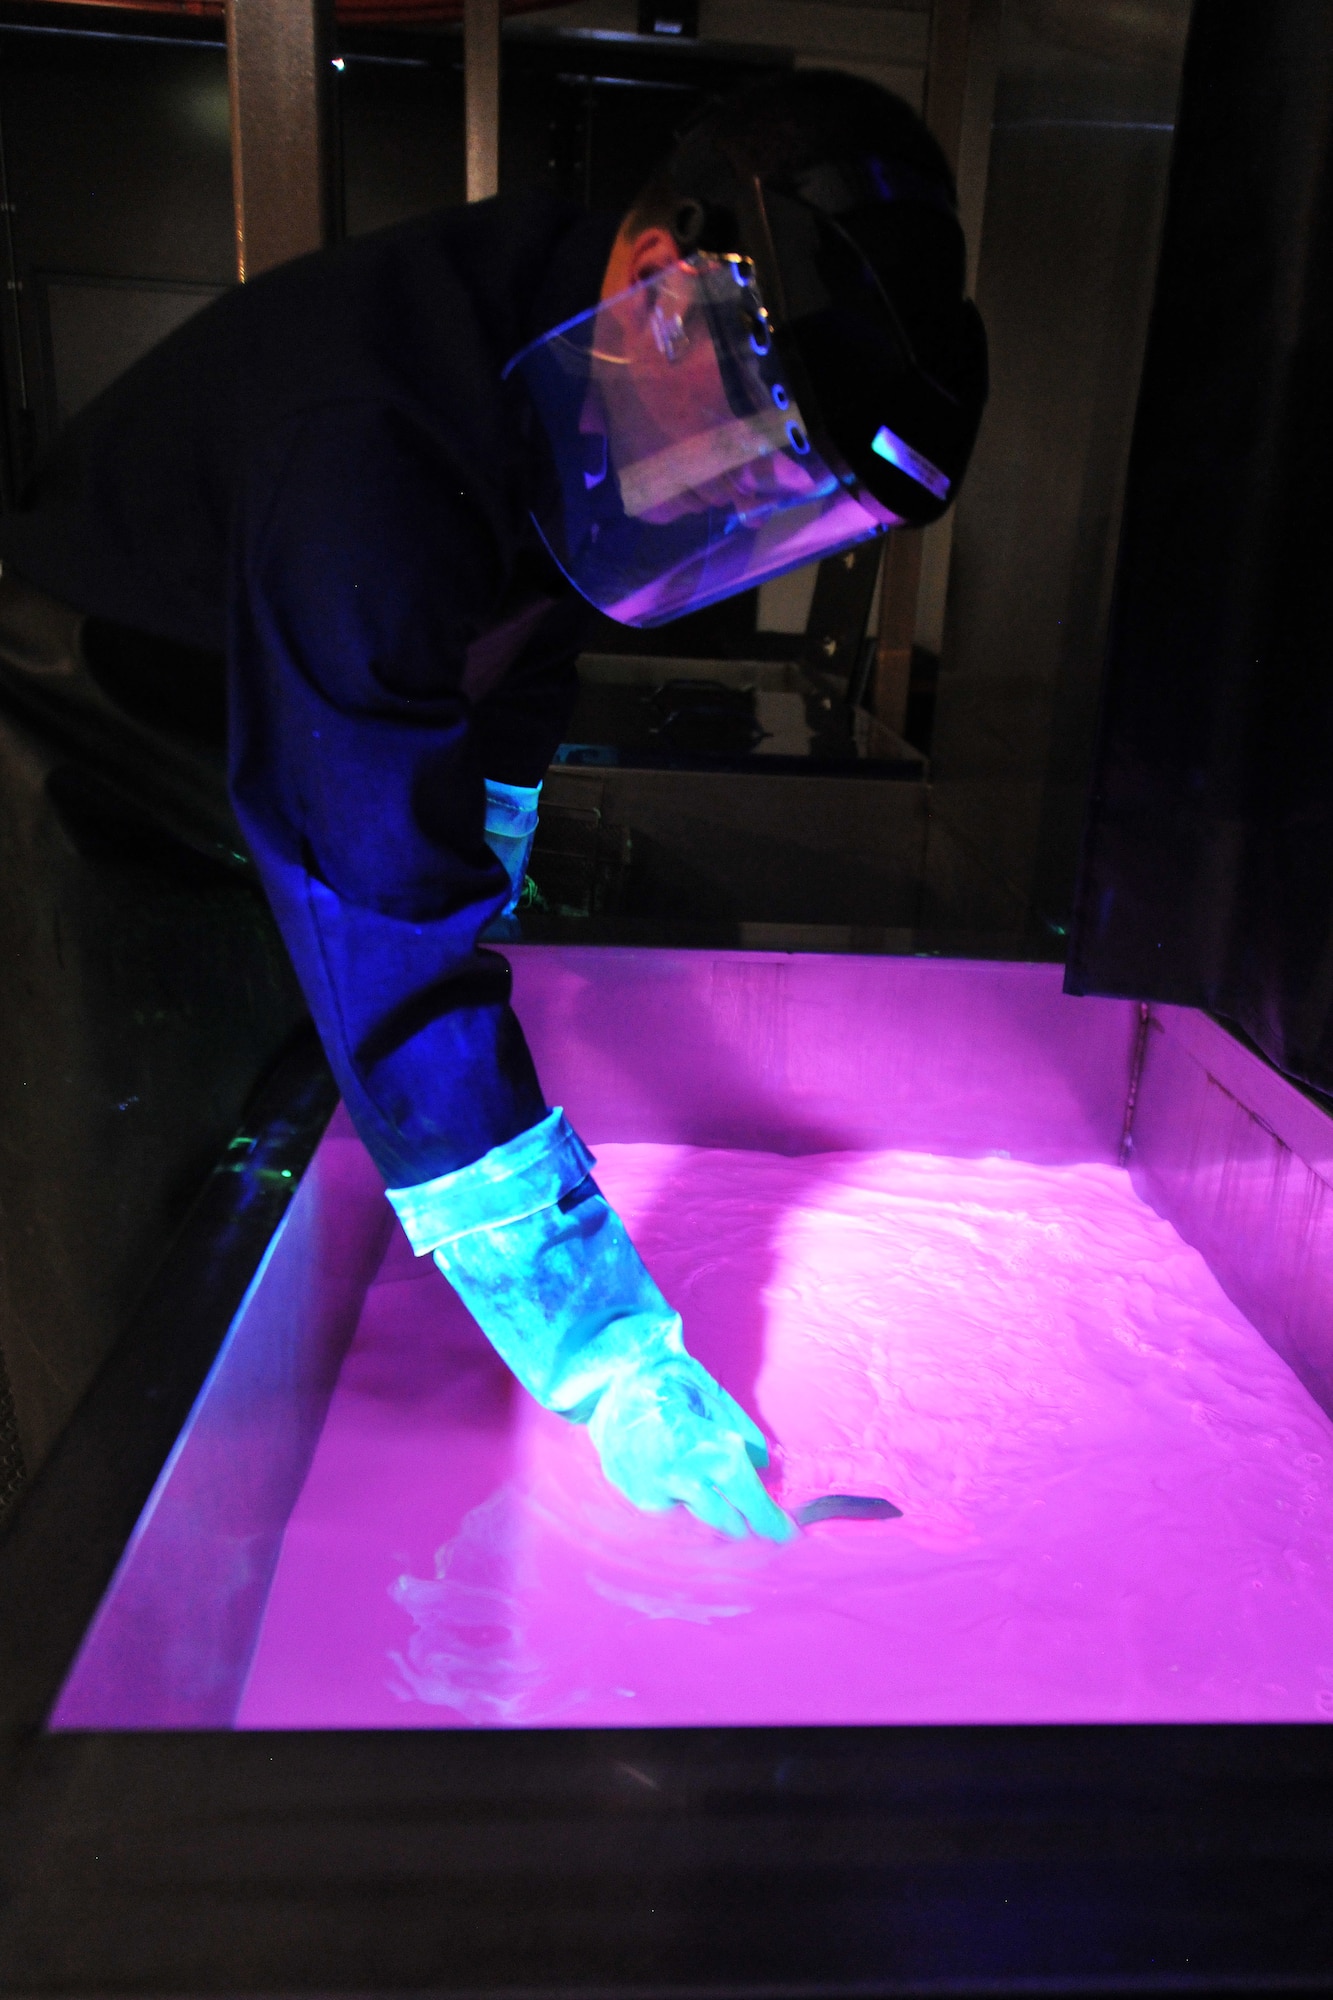 Staff Sgt. Joshua Paserba, 86th Maintenance Squadron nondestructive inspection technician, performs a step in the penetrant inspection process, July 31, 2013, Ramstein Air Base, Germany.  This part in the process uses an emulsifying bath, which removes traces of excess penetrant, allowing crack indications to be more readily visible.  (U.S. Air Force photo/Senior Airman Chris Willis)